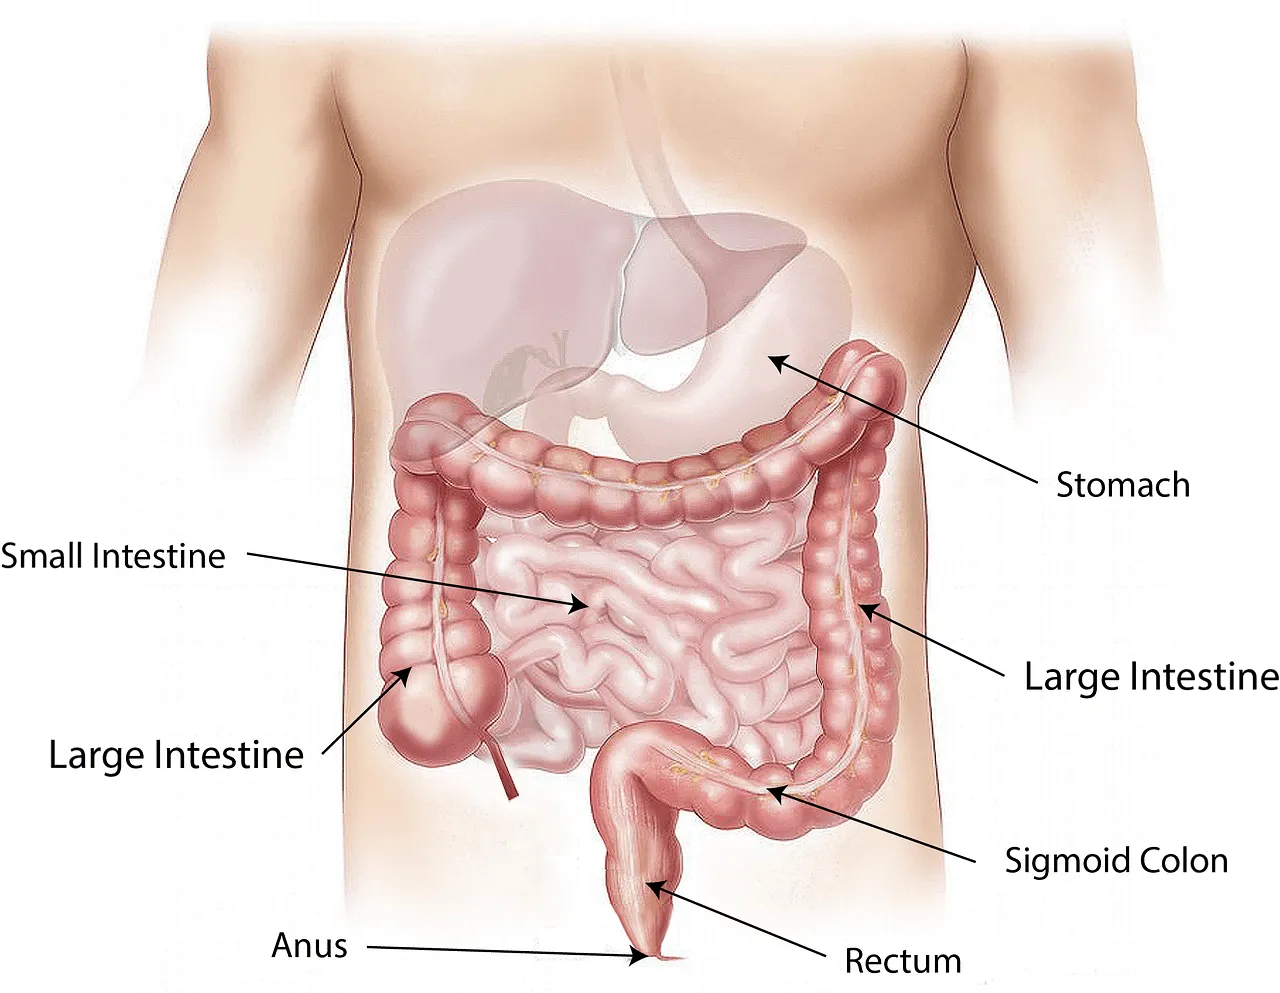 The digestive process and the digestive system contain many parts and organs that help digest food in the stomach.